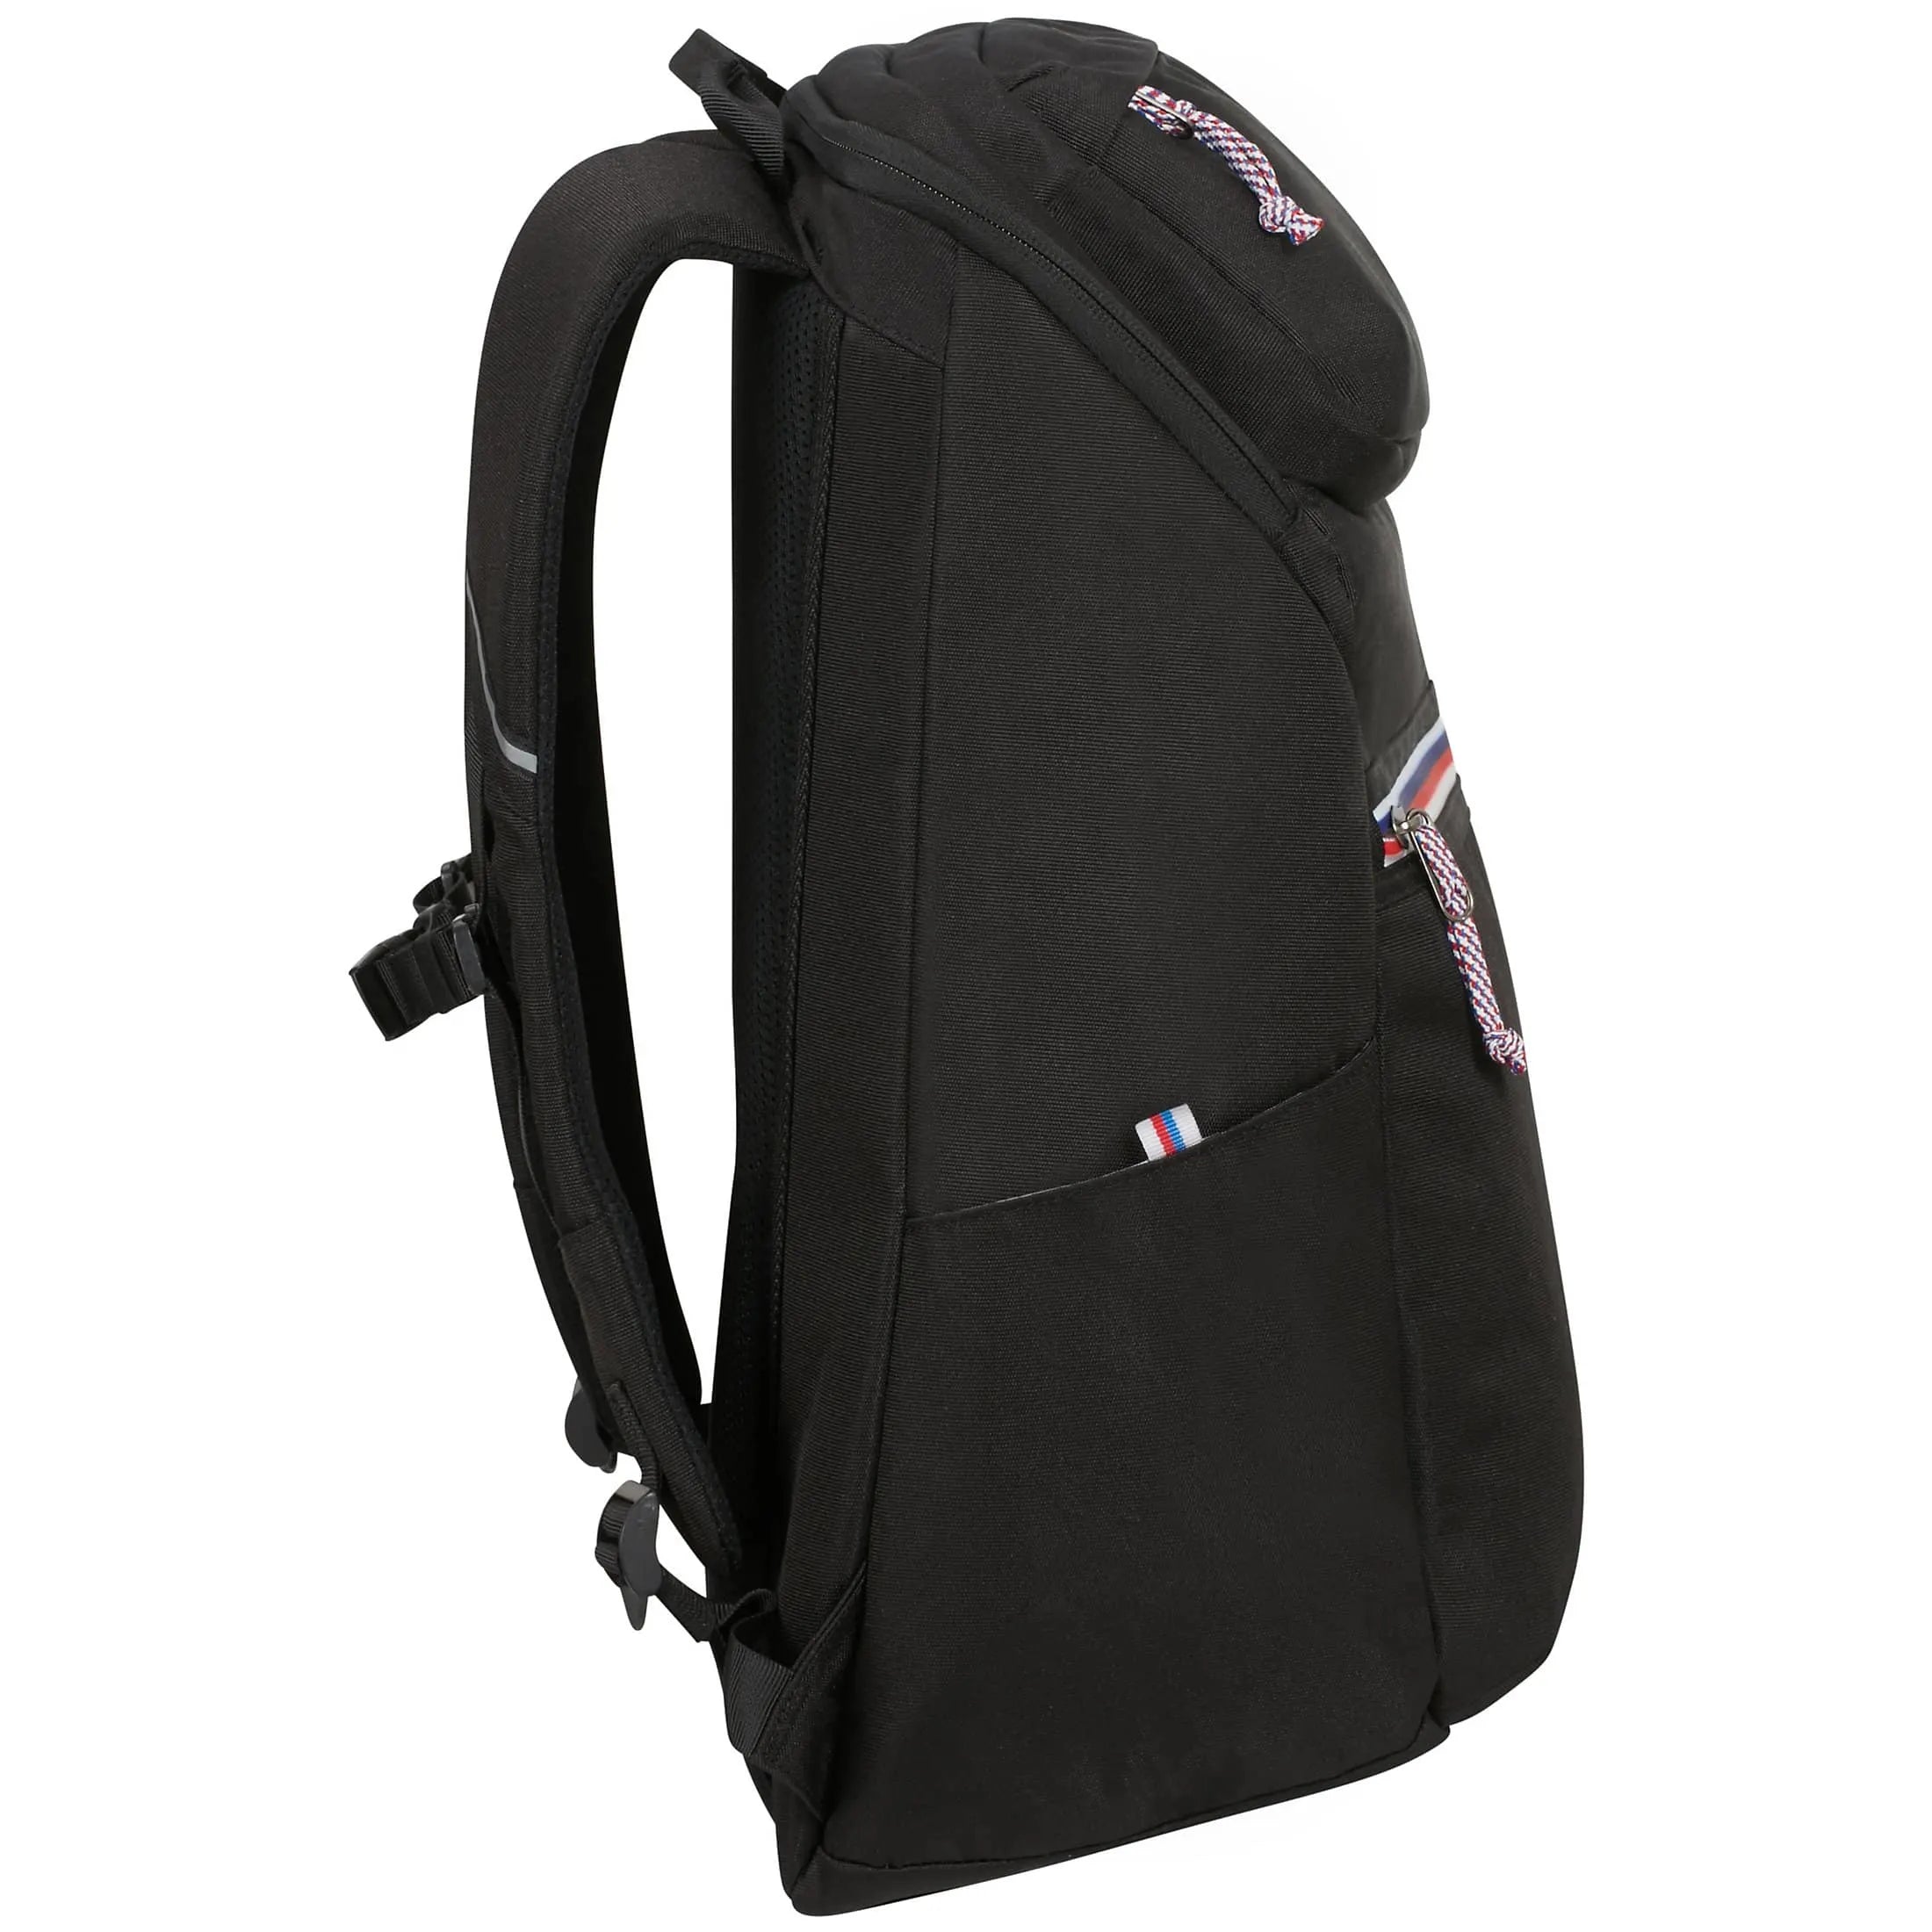 American Tourister Upbeat Backpack 51 cm - black